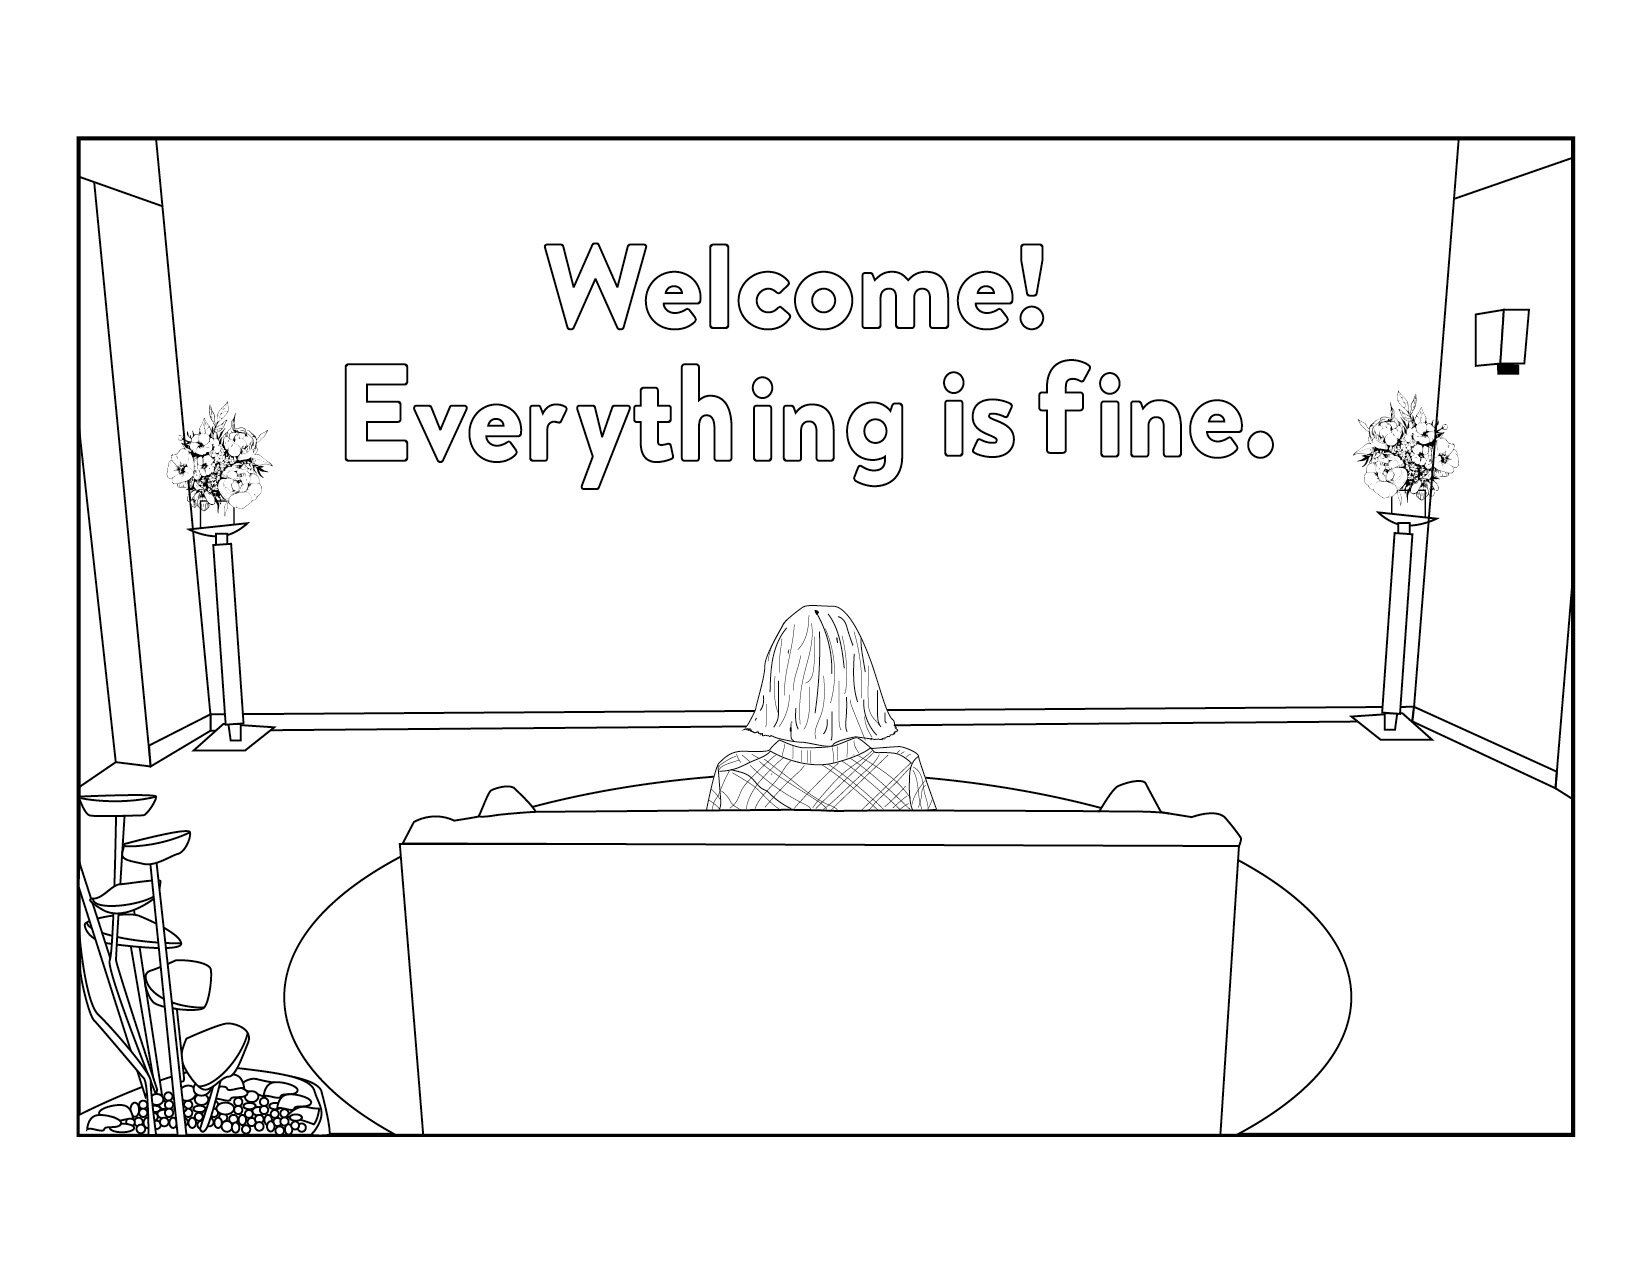 Everything is fine Thumbnail.jpg